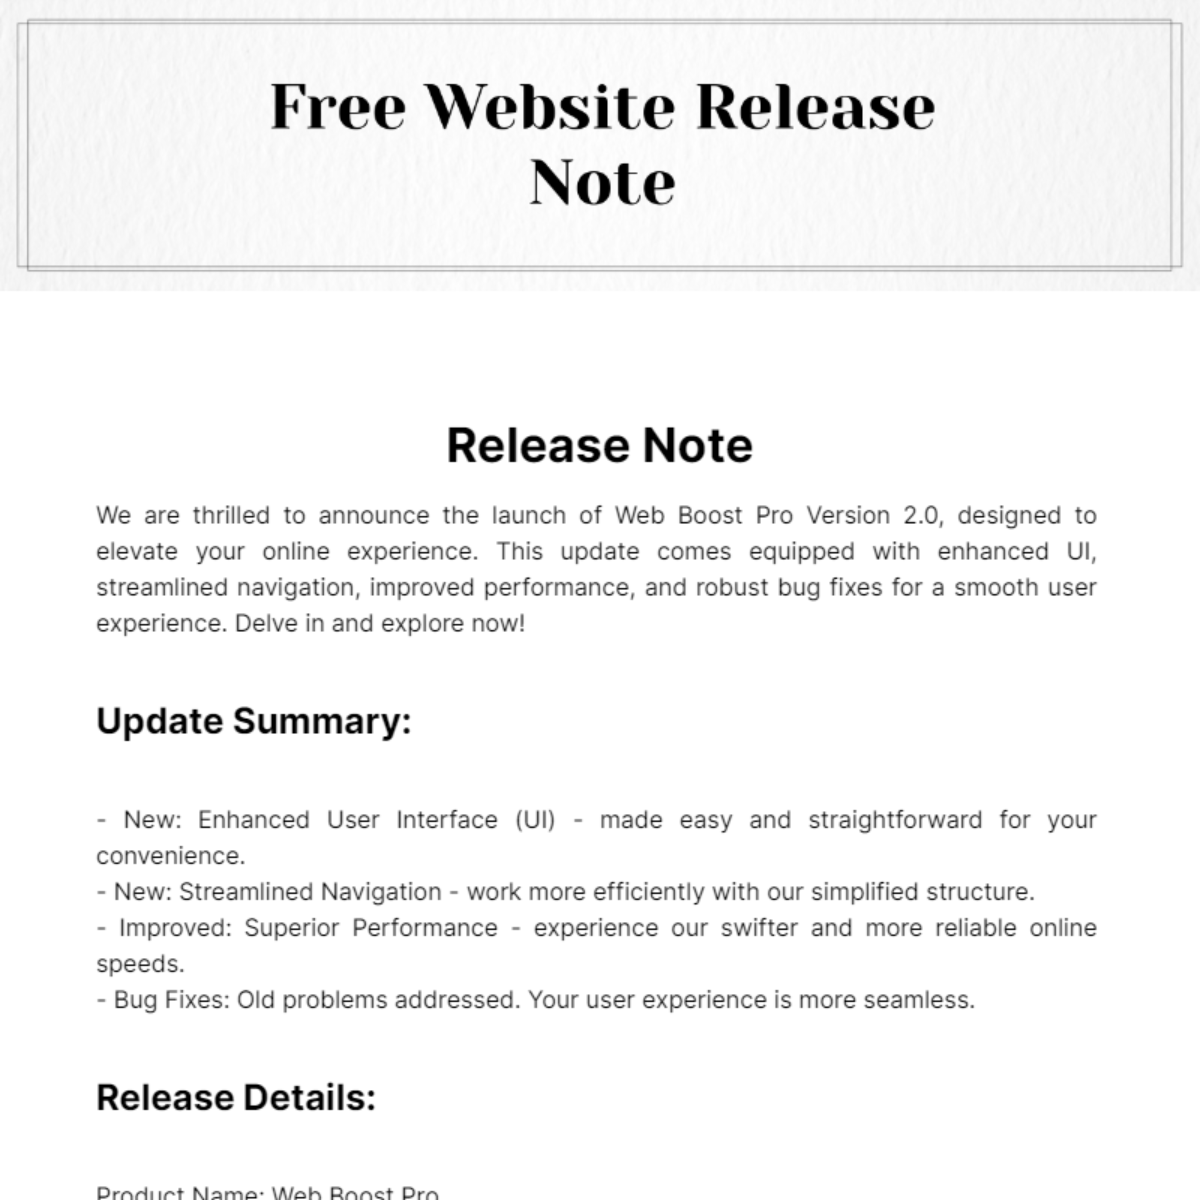 Free Website Release Note Template